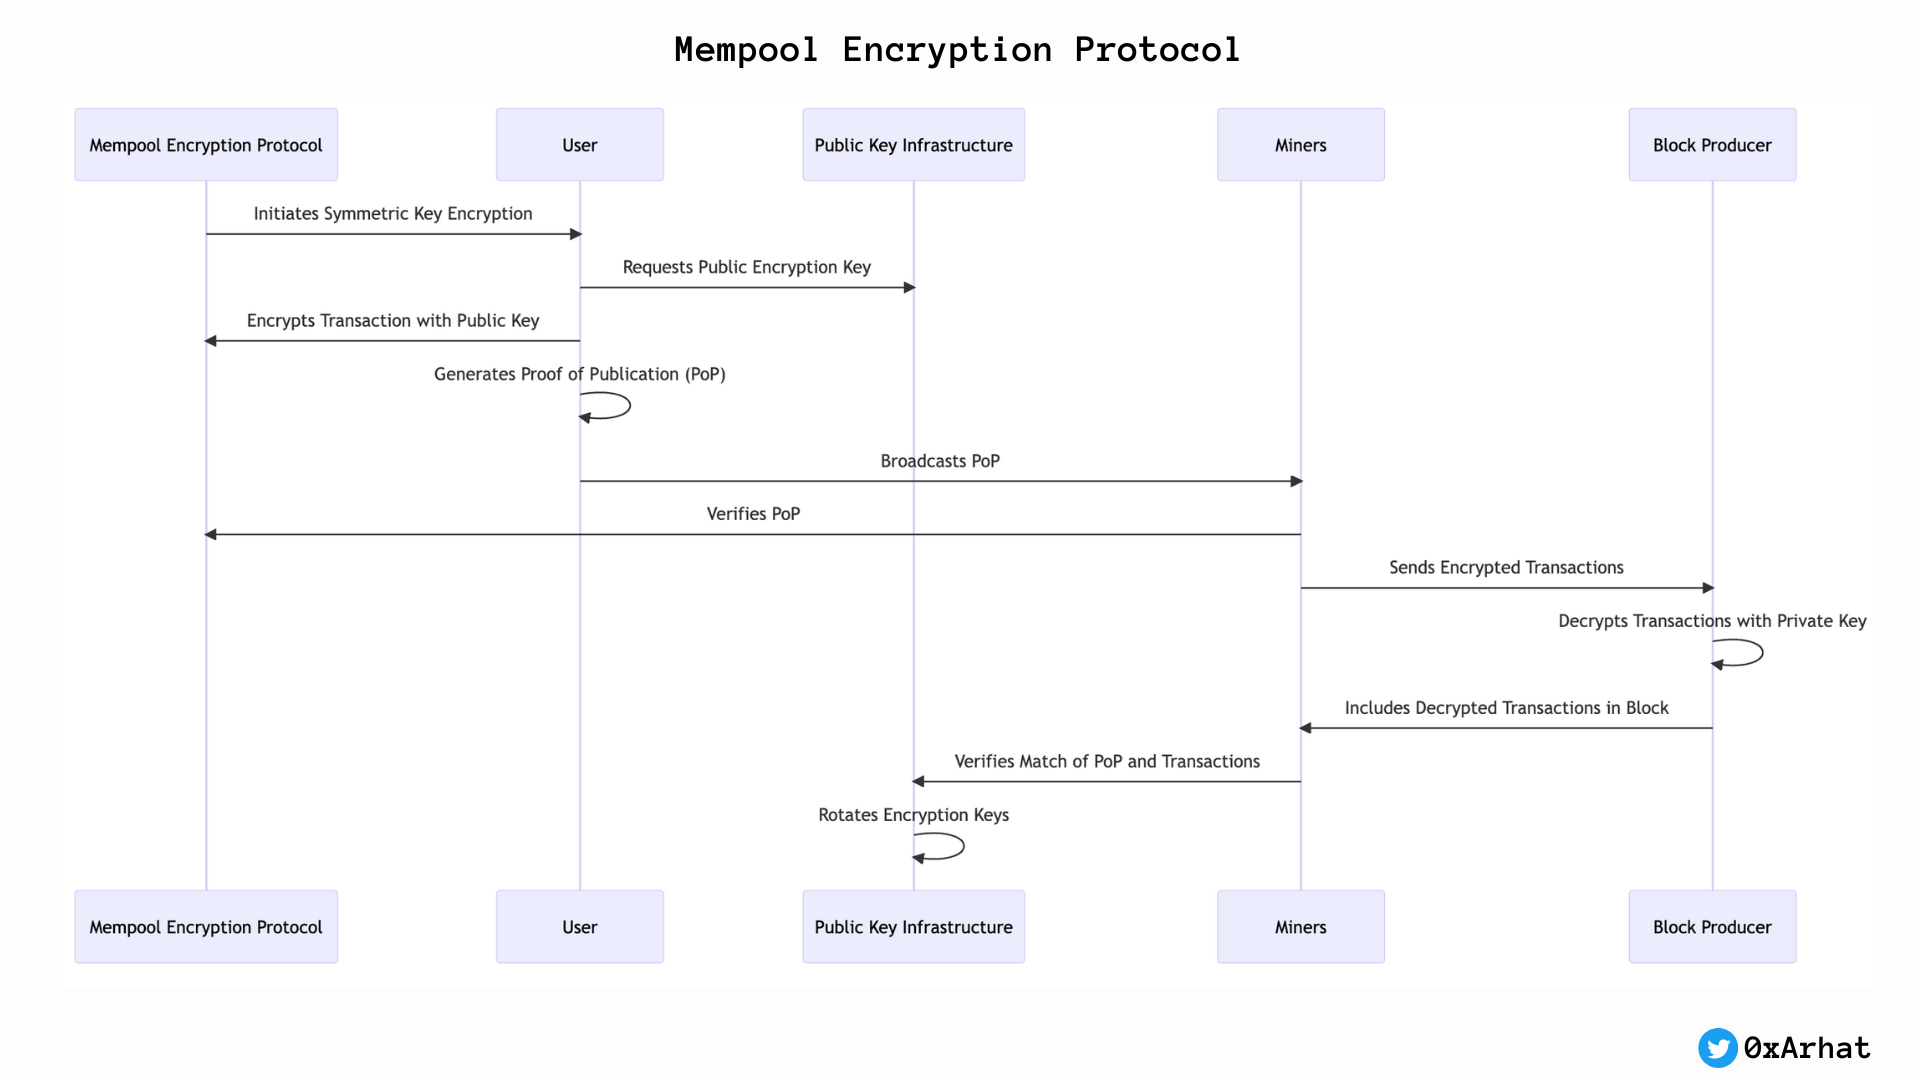 This 10-step process allows for both privacy of mempool transactions as well as verification that they were correctly published earlier. 